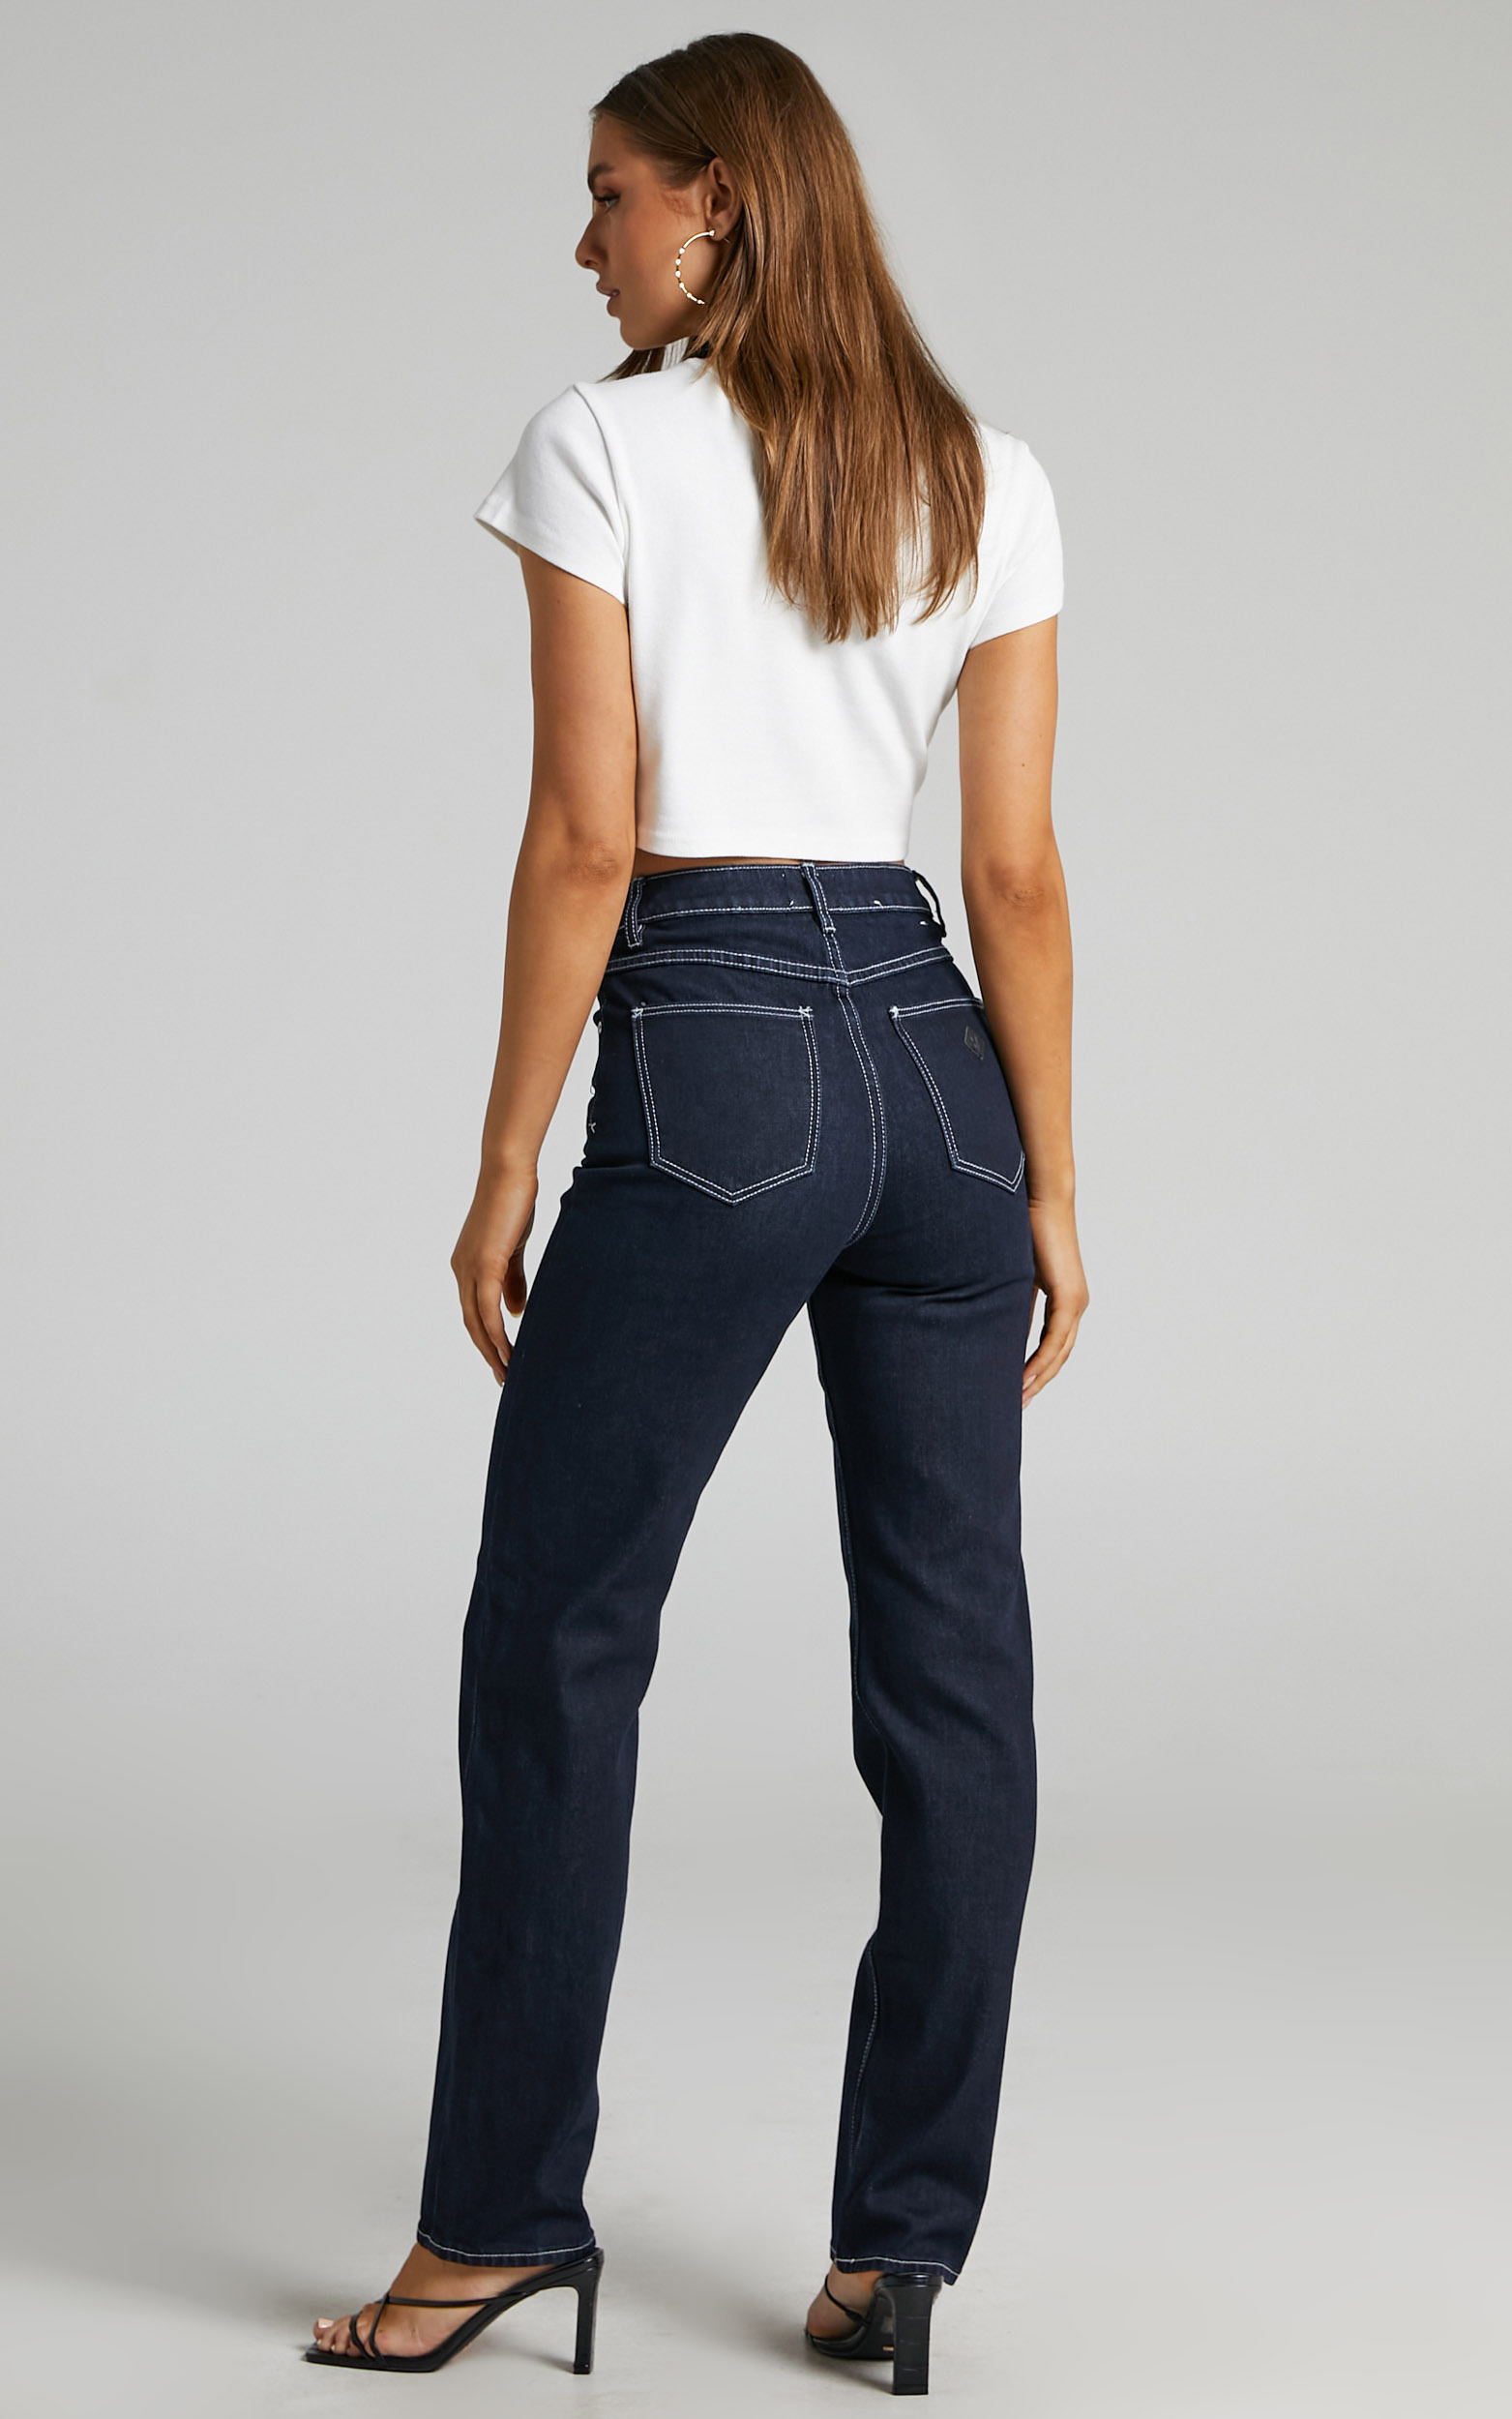 Abrand - A '94 High Straight Alice Jean in Rinse Denim - 06, BLU1, hi-res image number null